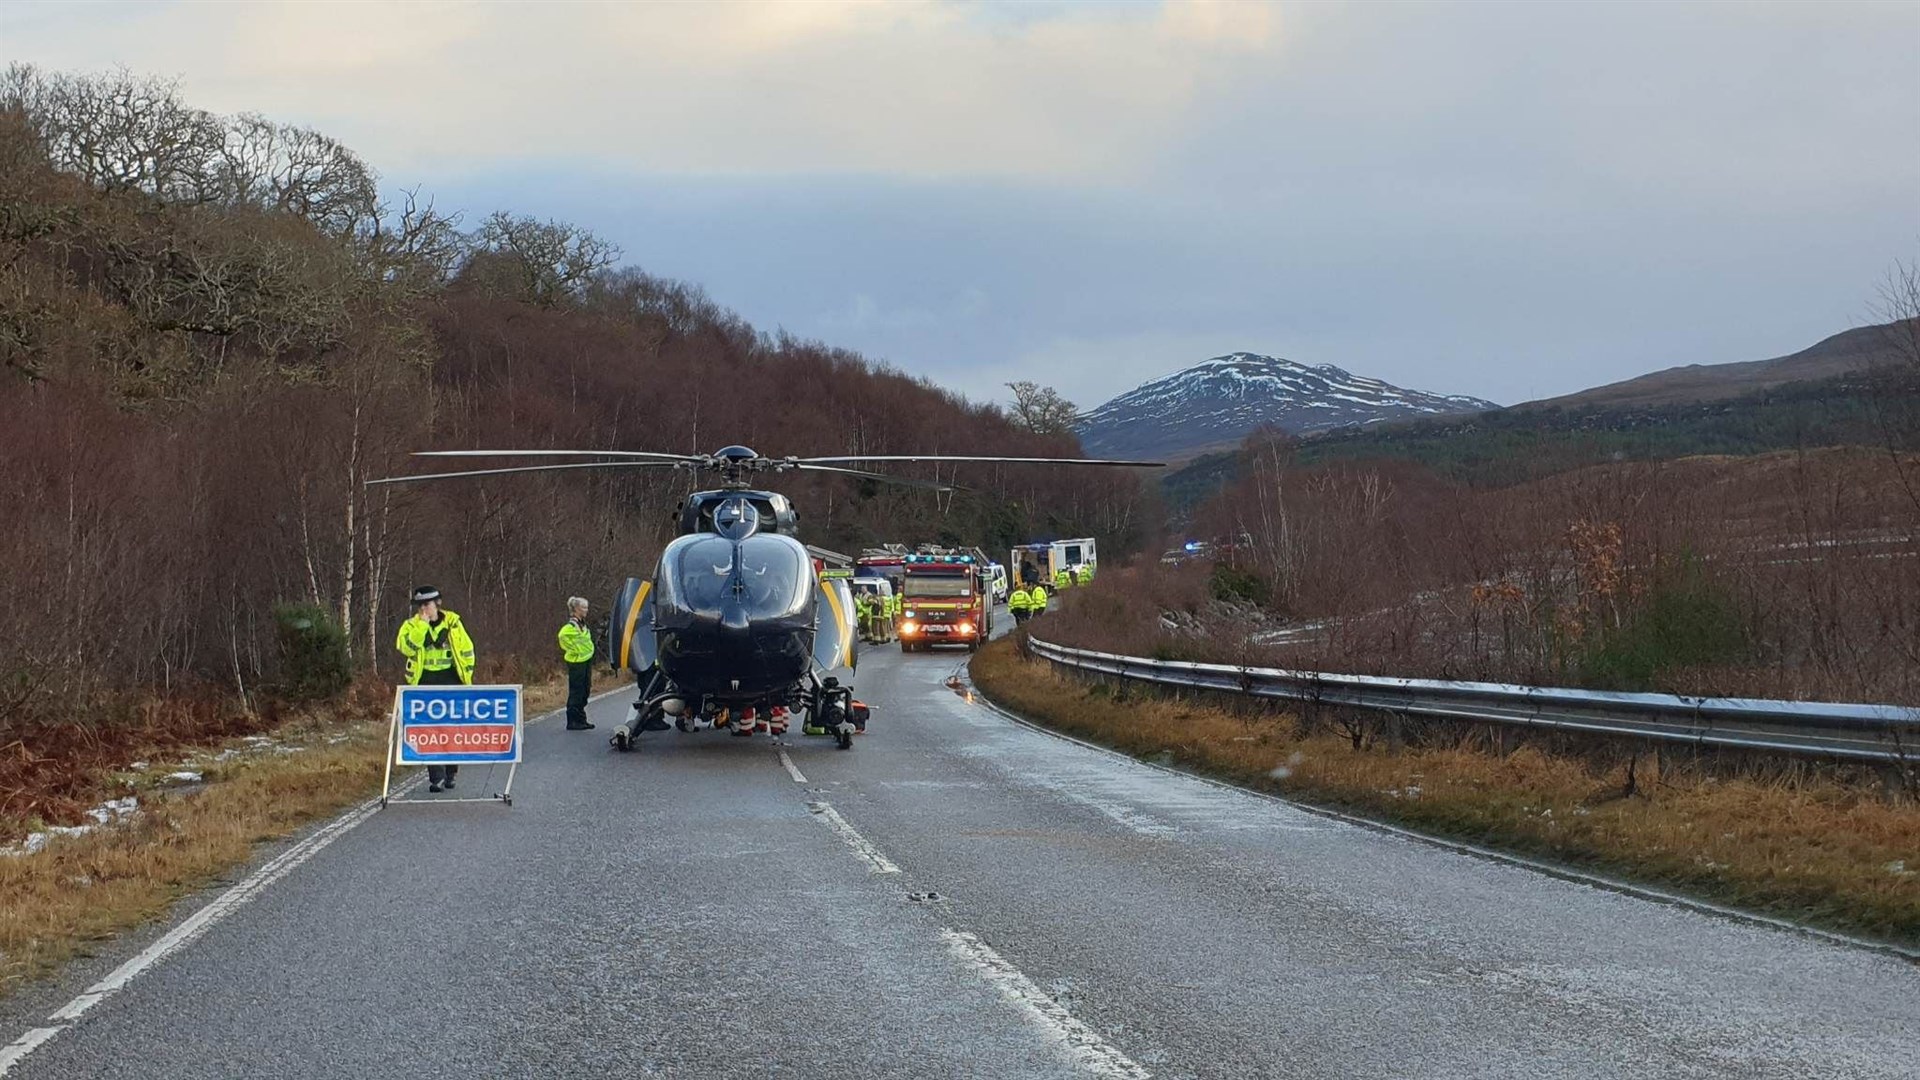 Helicopters arriving at the crash between Garve and Achnsheen. Picture courtesy of Steve Taylor.